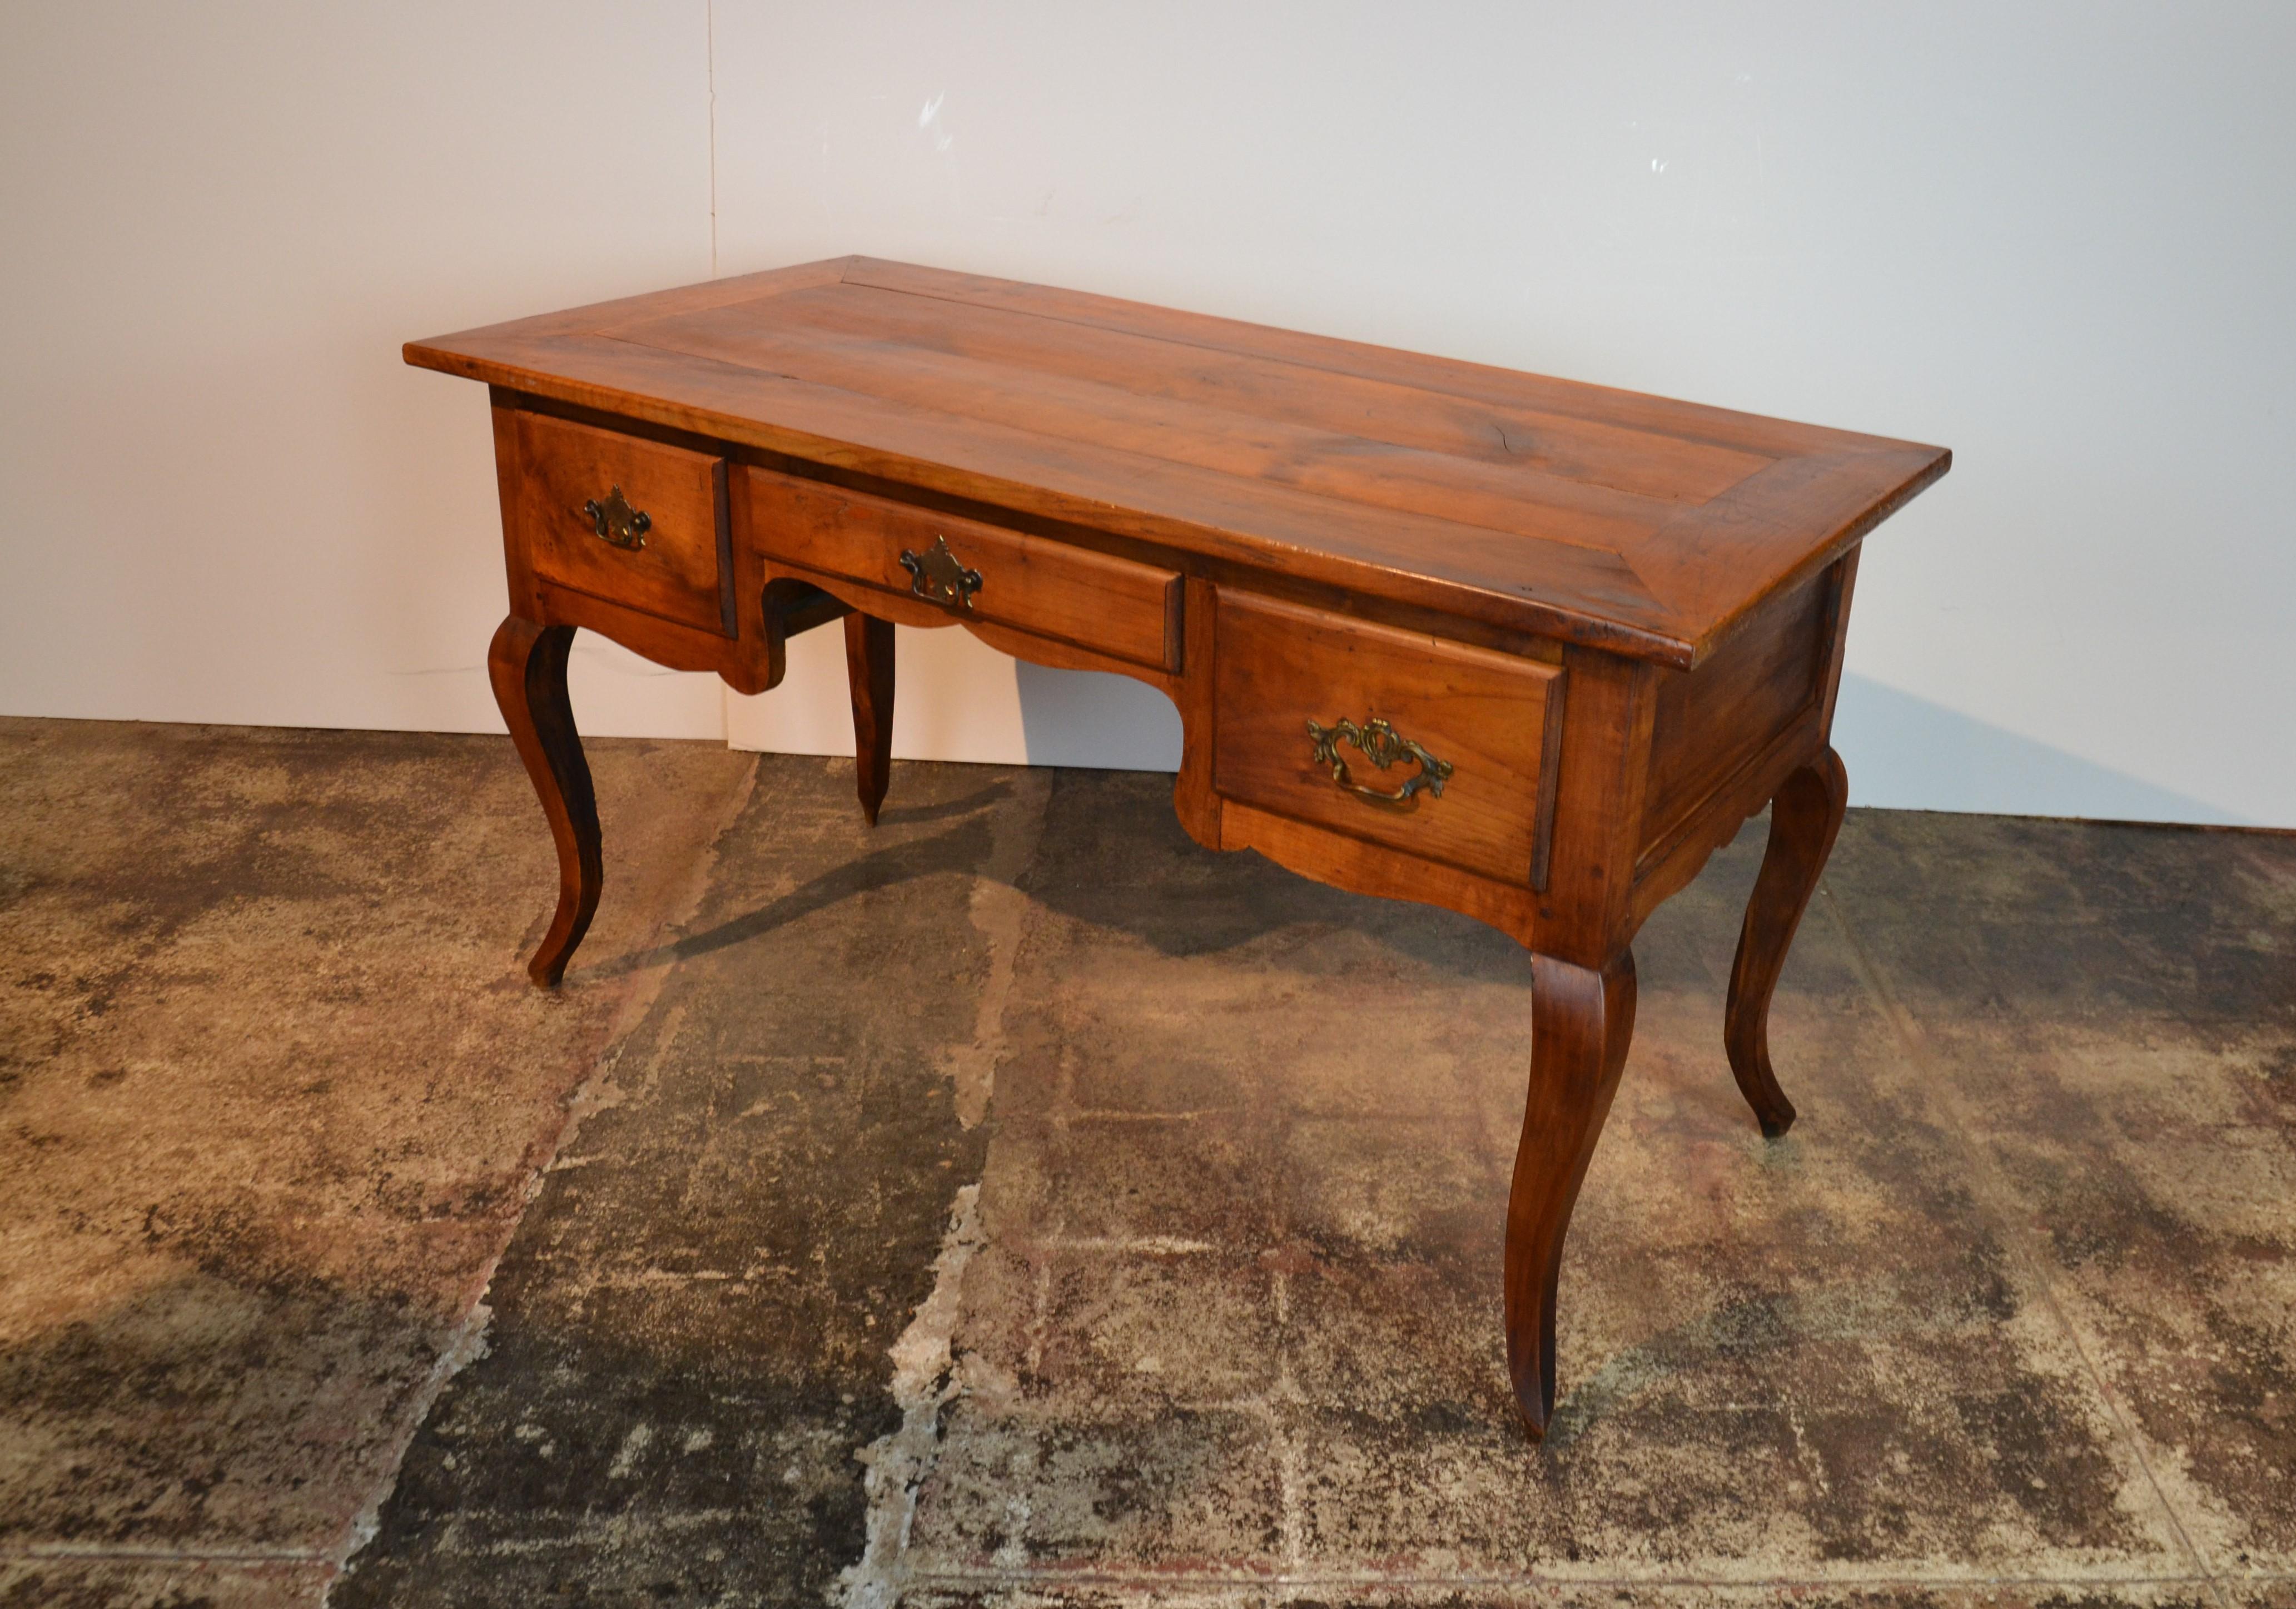 A French Provincial fruitwood desk in the Louis XV style. Solid fruitwood with 3 drawers to the front. Inset panels to the sides.